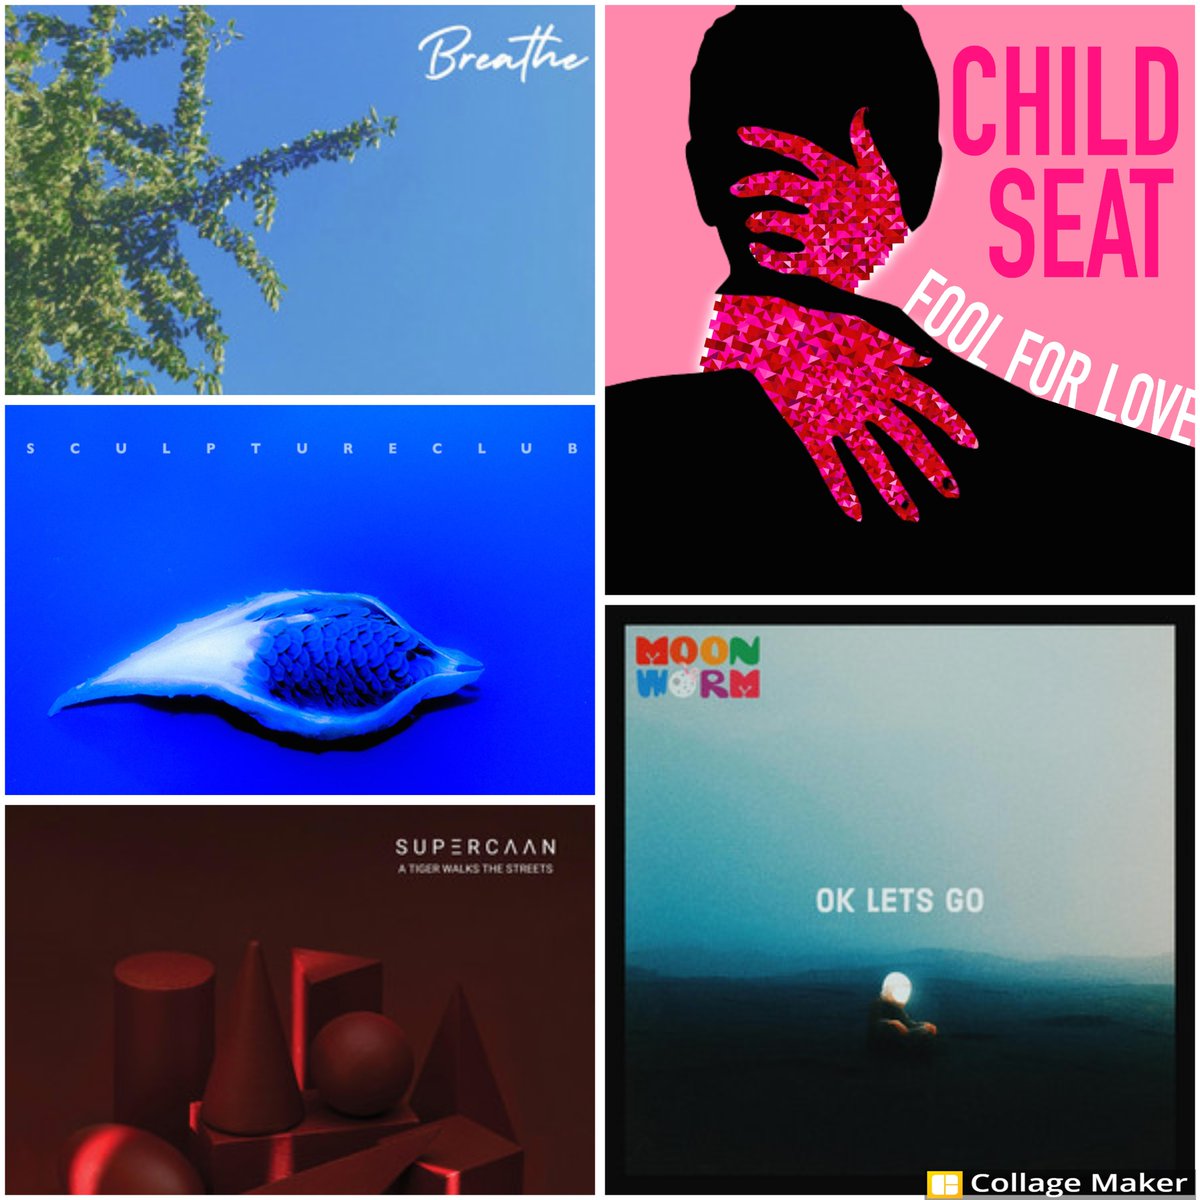 5 more tracks are featured today so have a listen to the latest releases from Sculpture Club (#sculptureclub), Bedroom Tax (@BedroomTaxBand), Moon Worm (#moonworm), Supercaan (@Supercaan_Music) and Child Seat (@ChildSeatmusic) - link as always in our bio!